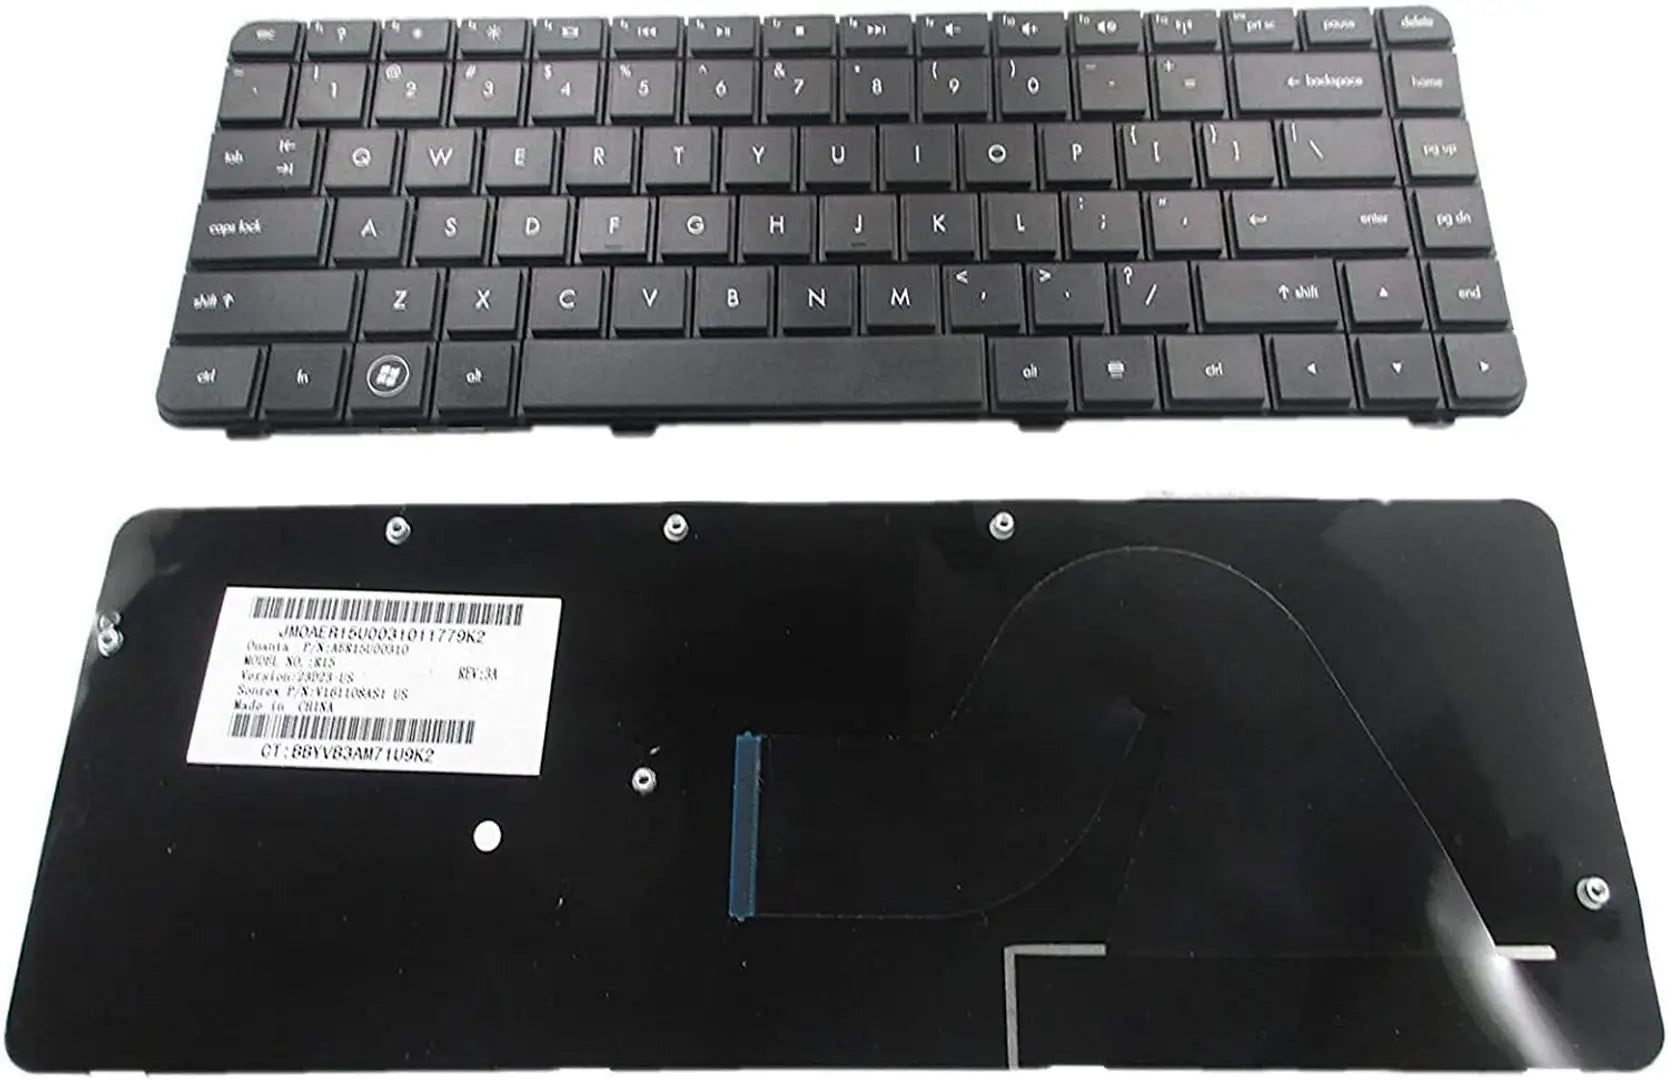 Wistar Laptop Keyboard Compatible for HP Pavilion Presario CQ42 CQ42-100 CQ42-200 G42 G42-300 G42T-200 G42-230US G42-240US G42-410US G42-232NR G42-224CA Black